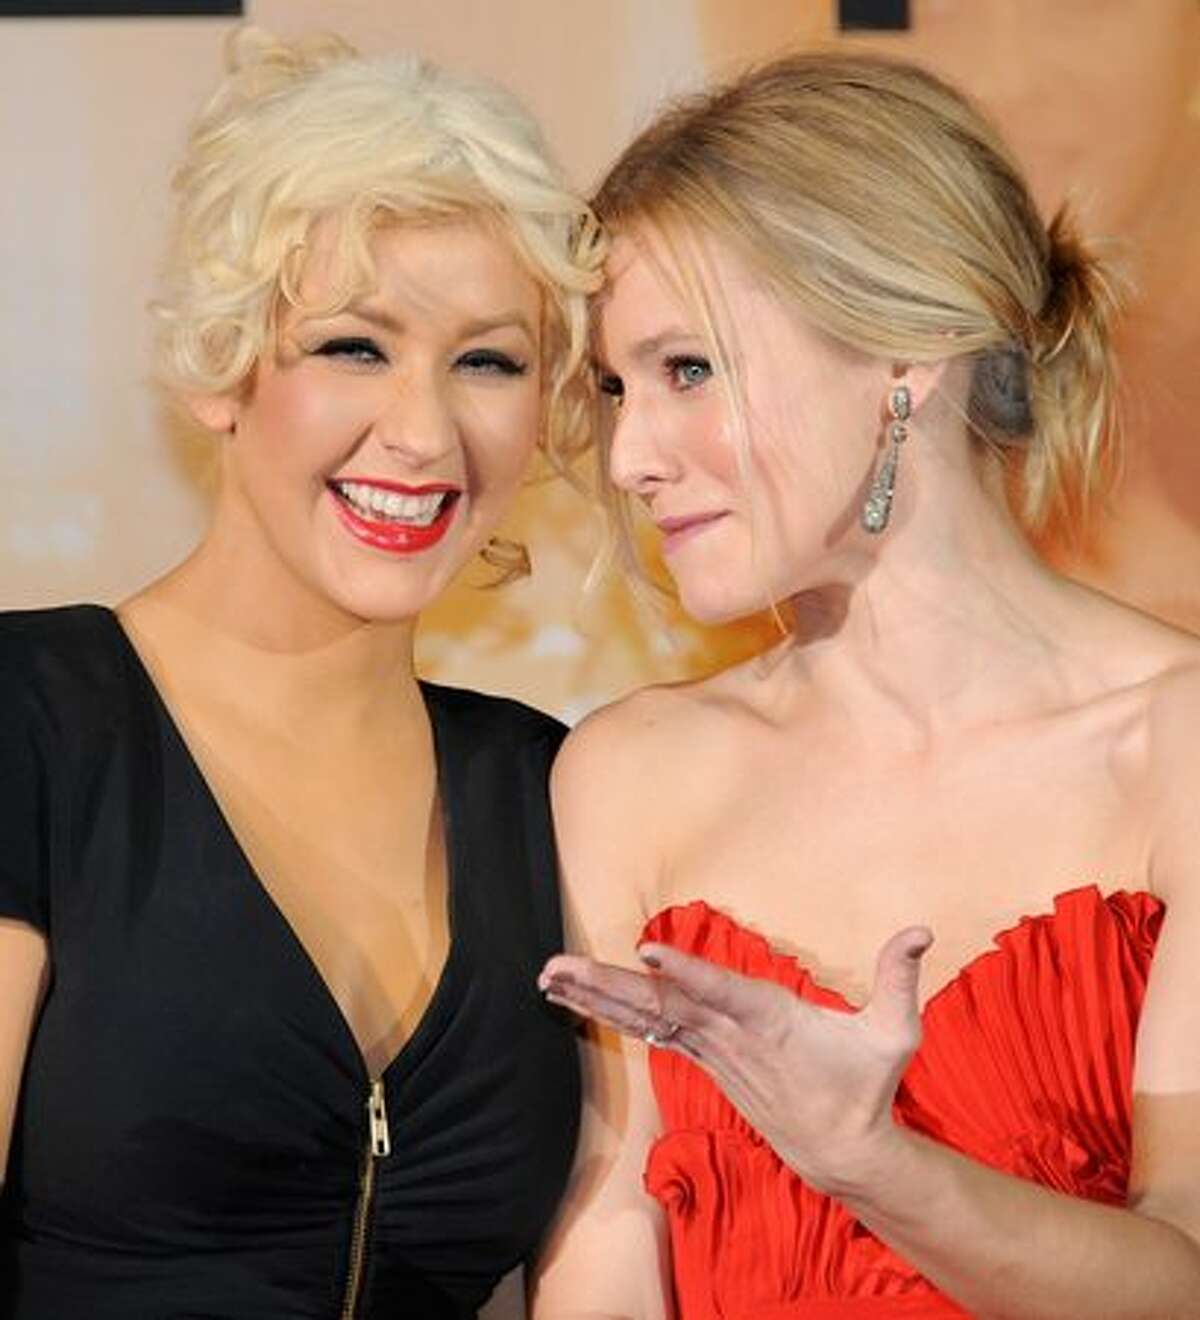 Actress Christina Aguilera (L) shares a light moment with Kristen Bell (R) during the Japan premier of their film "Burlesque" in Tokyo.